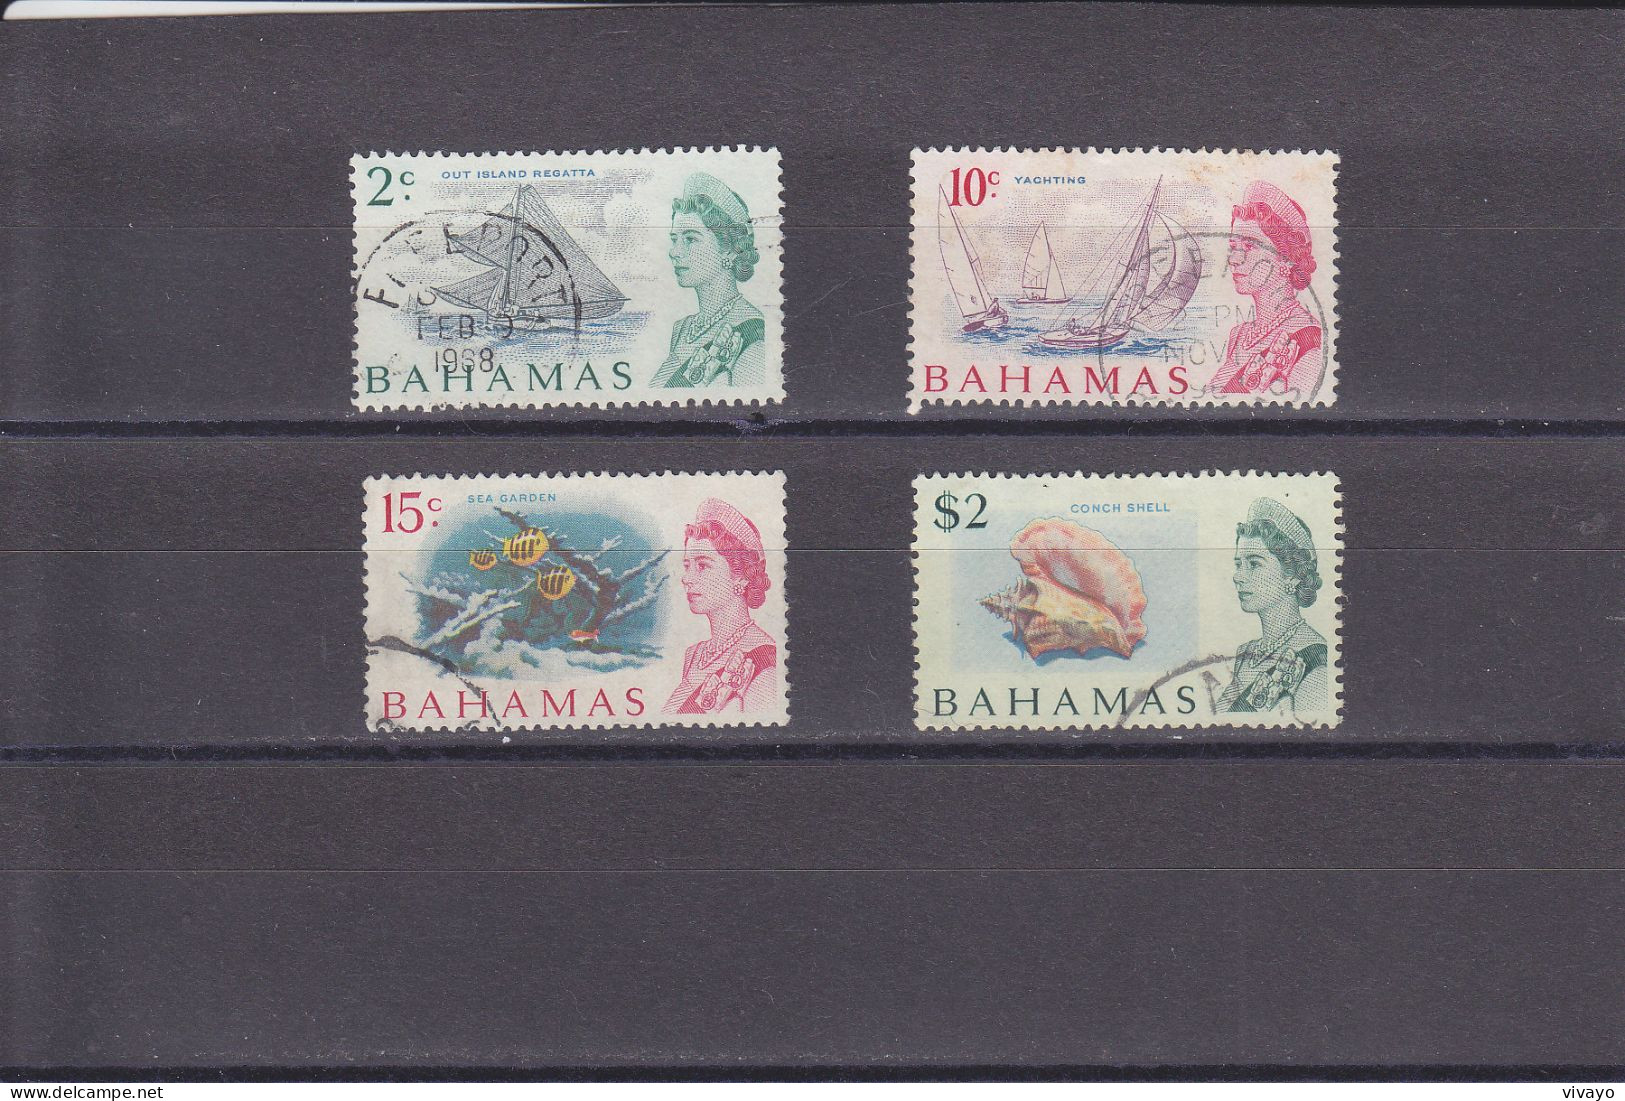 BAHAMAS - 1967 - O/FINE CANCELLED -  QEII & REGATTA, YACHTING, SEA GARDEN, SHELL  Yv. 242, 247, 250, 254 - 1963-1973 Ministerial Government